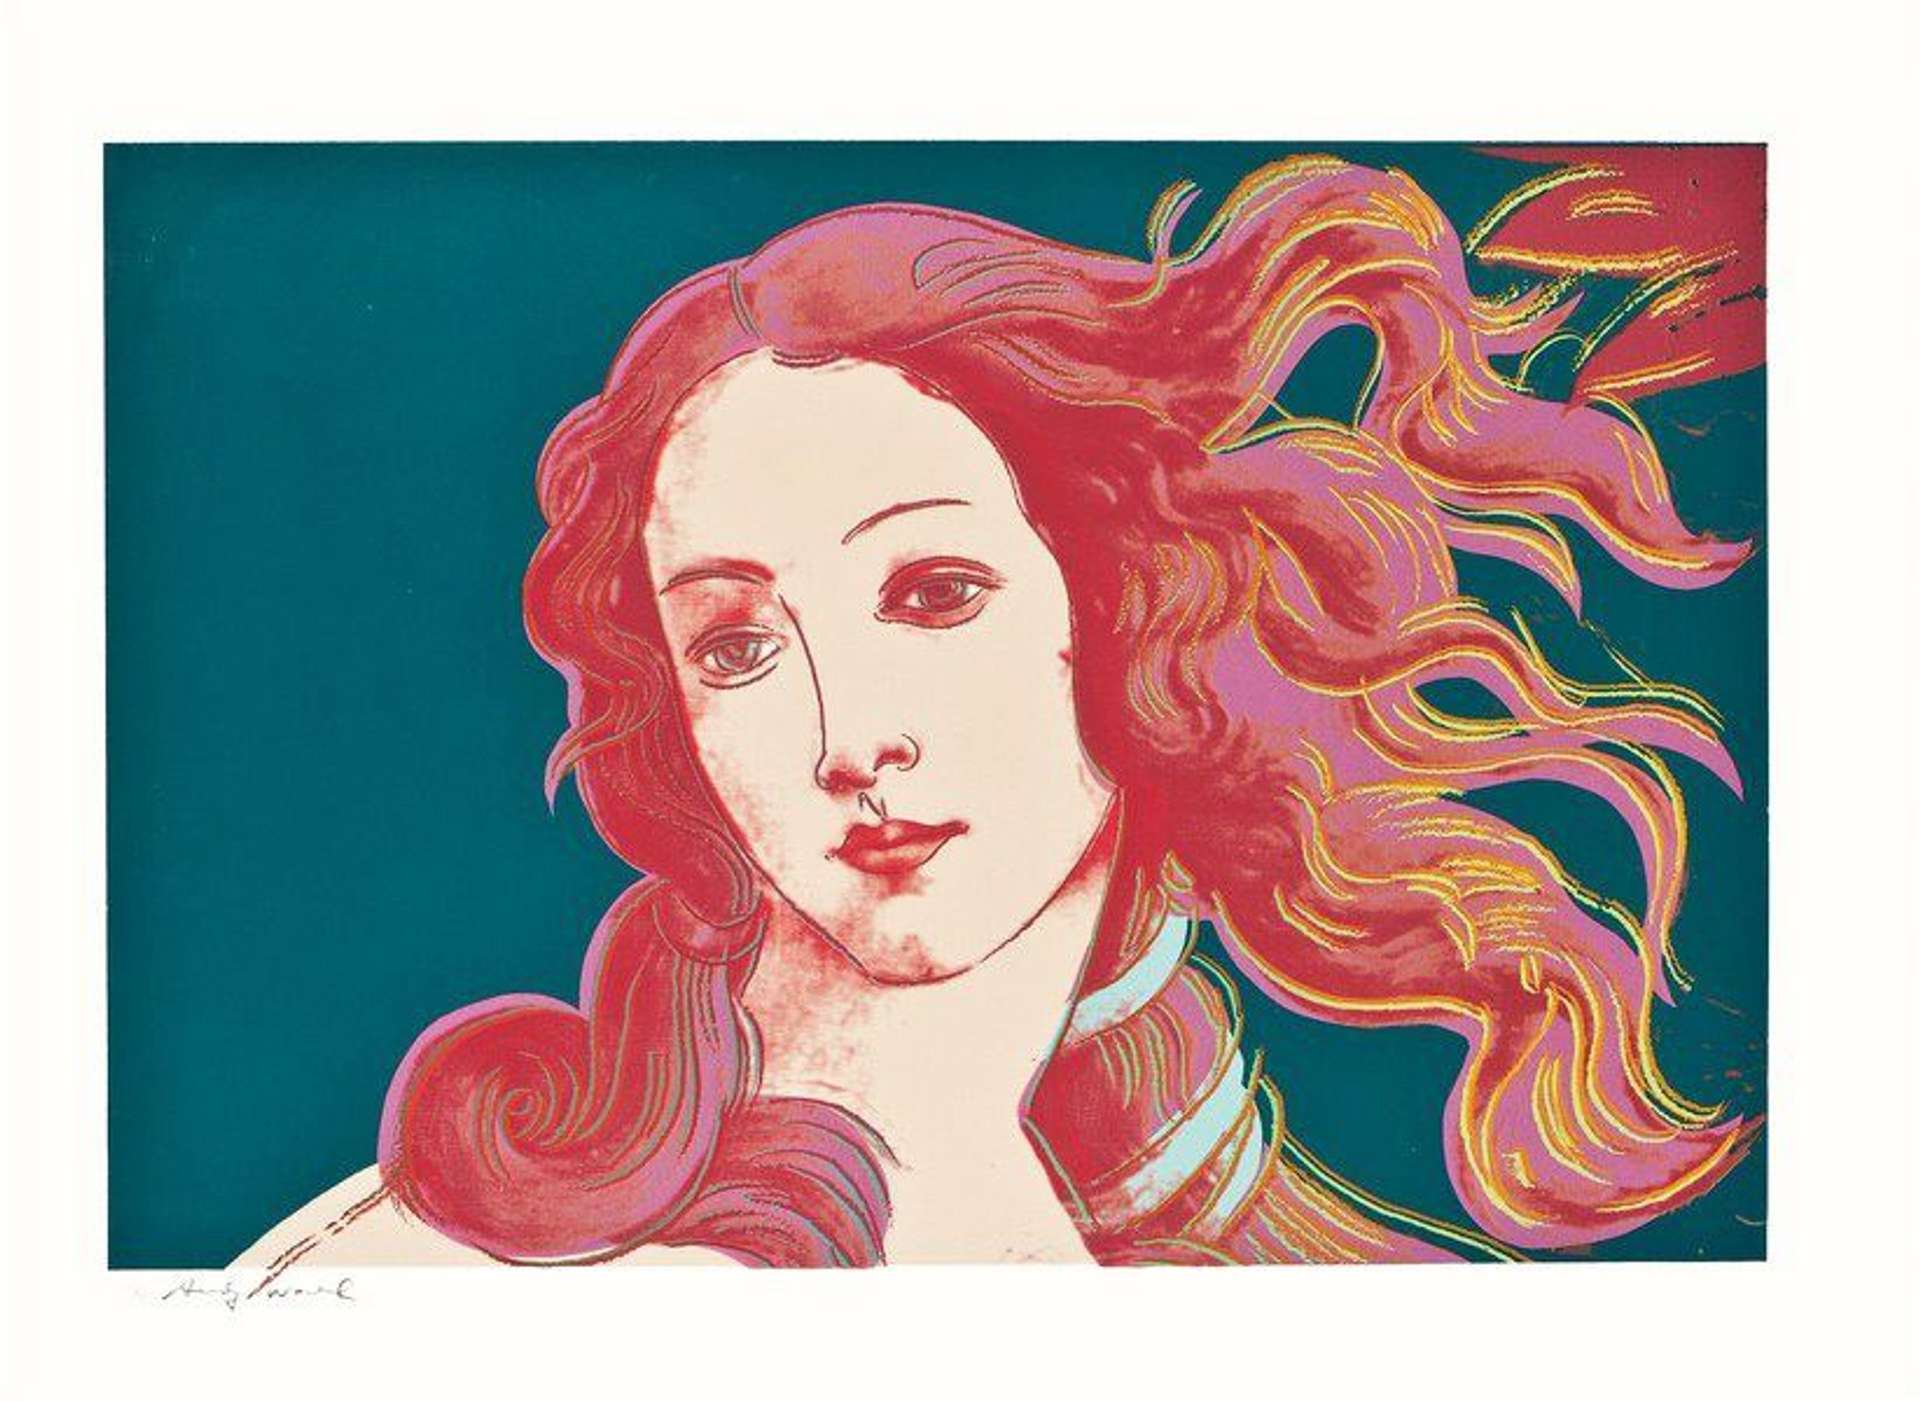 A screenprint by Andy Warhol, featuring an adaptation of Botticelli's ”The Birth of Venus.’’ The image focuses on the woman's head, slightly tilted, with flowing hair. The face is rendered in various shades of pink against a deep turquoise background.